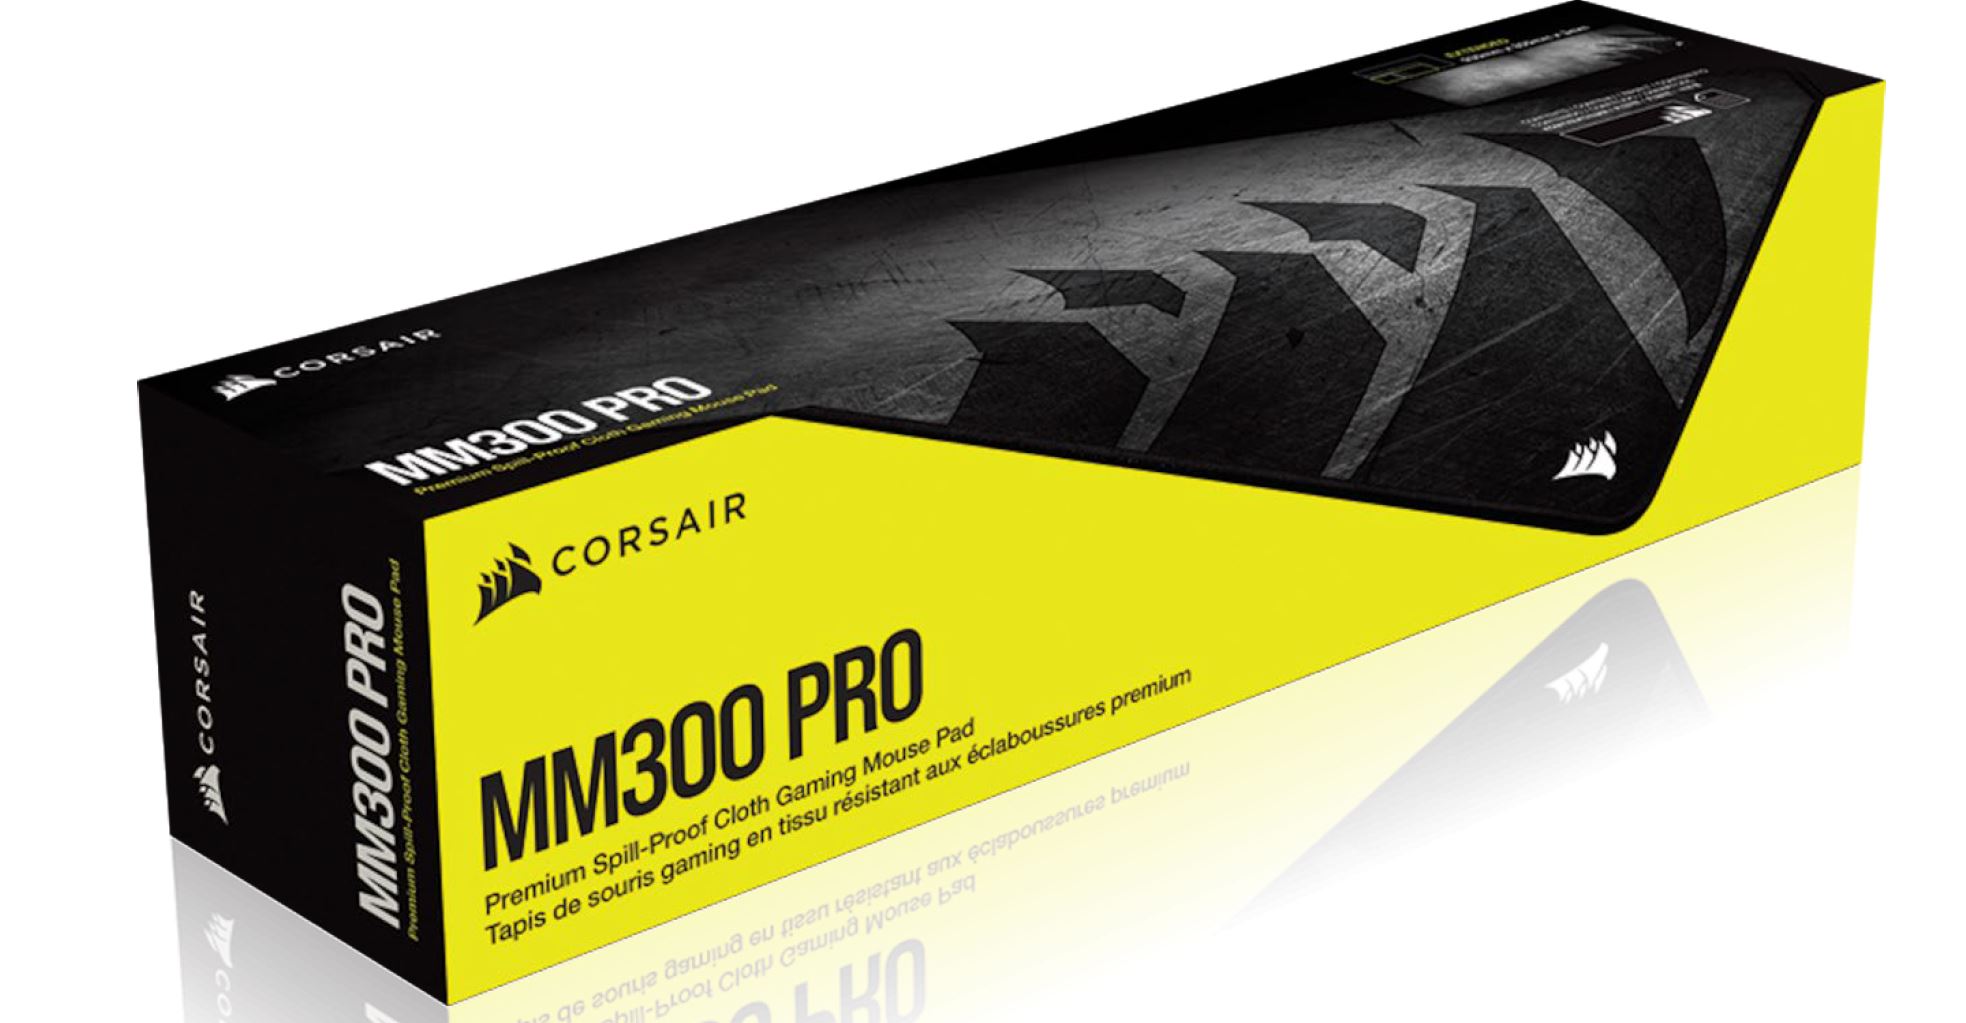 Keyboards and Mice/Corsair: Corsair, MM300, PRO, Premium, Spill-Proof, Cloth, Gaming, Mouse, Pad, â€“, Extended, 930mm, x, 300mm, x, 3mm, -, Graphic, Surface, 